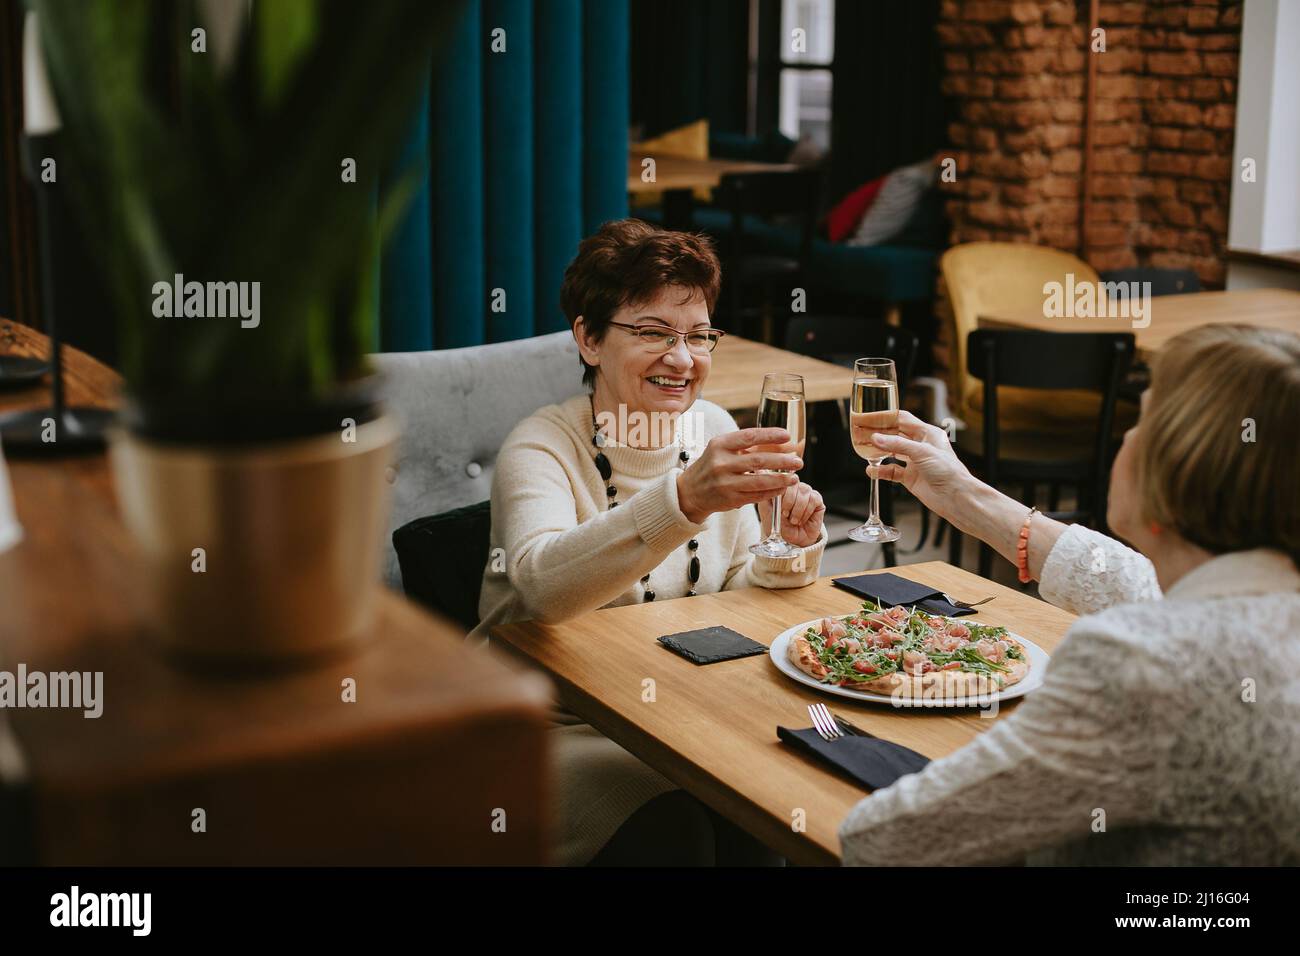 Two smiling elderly women with dark and fair hair clinking glasses of champagne sitting at table with pizza celebrating. Stock Photo